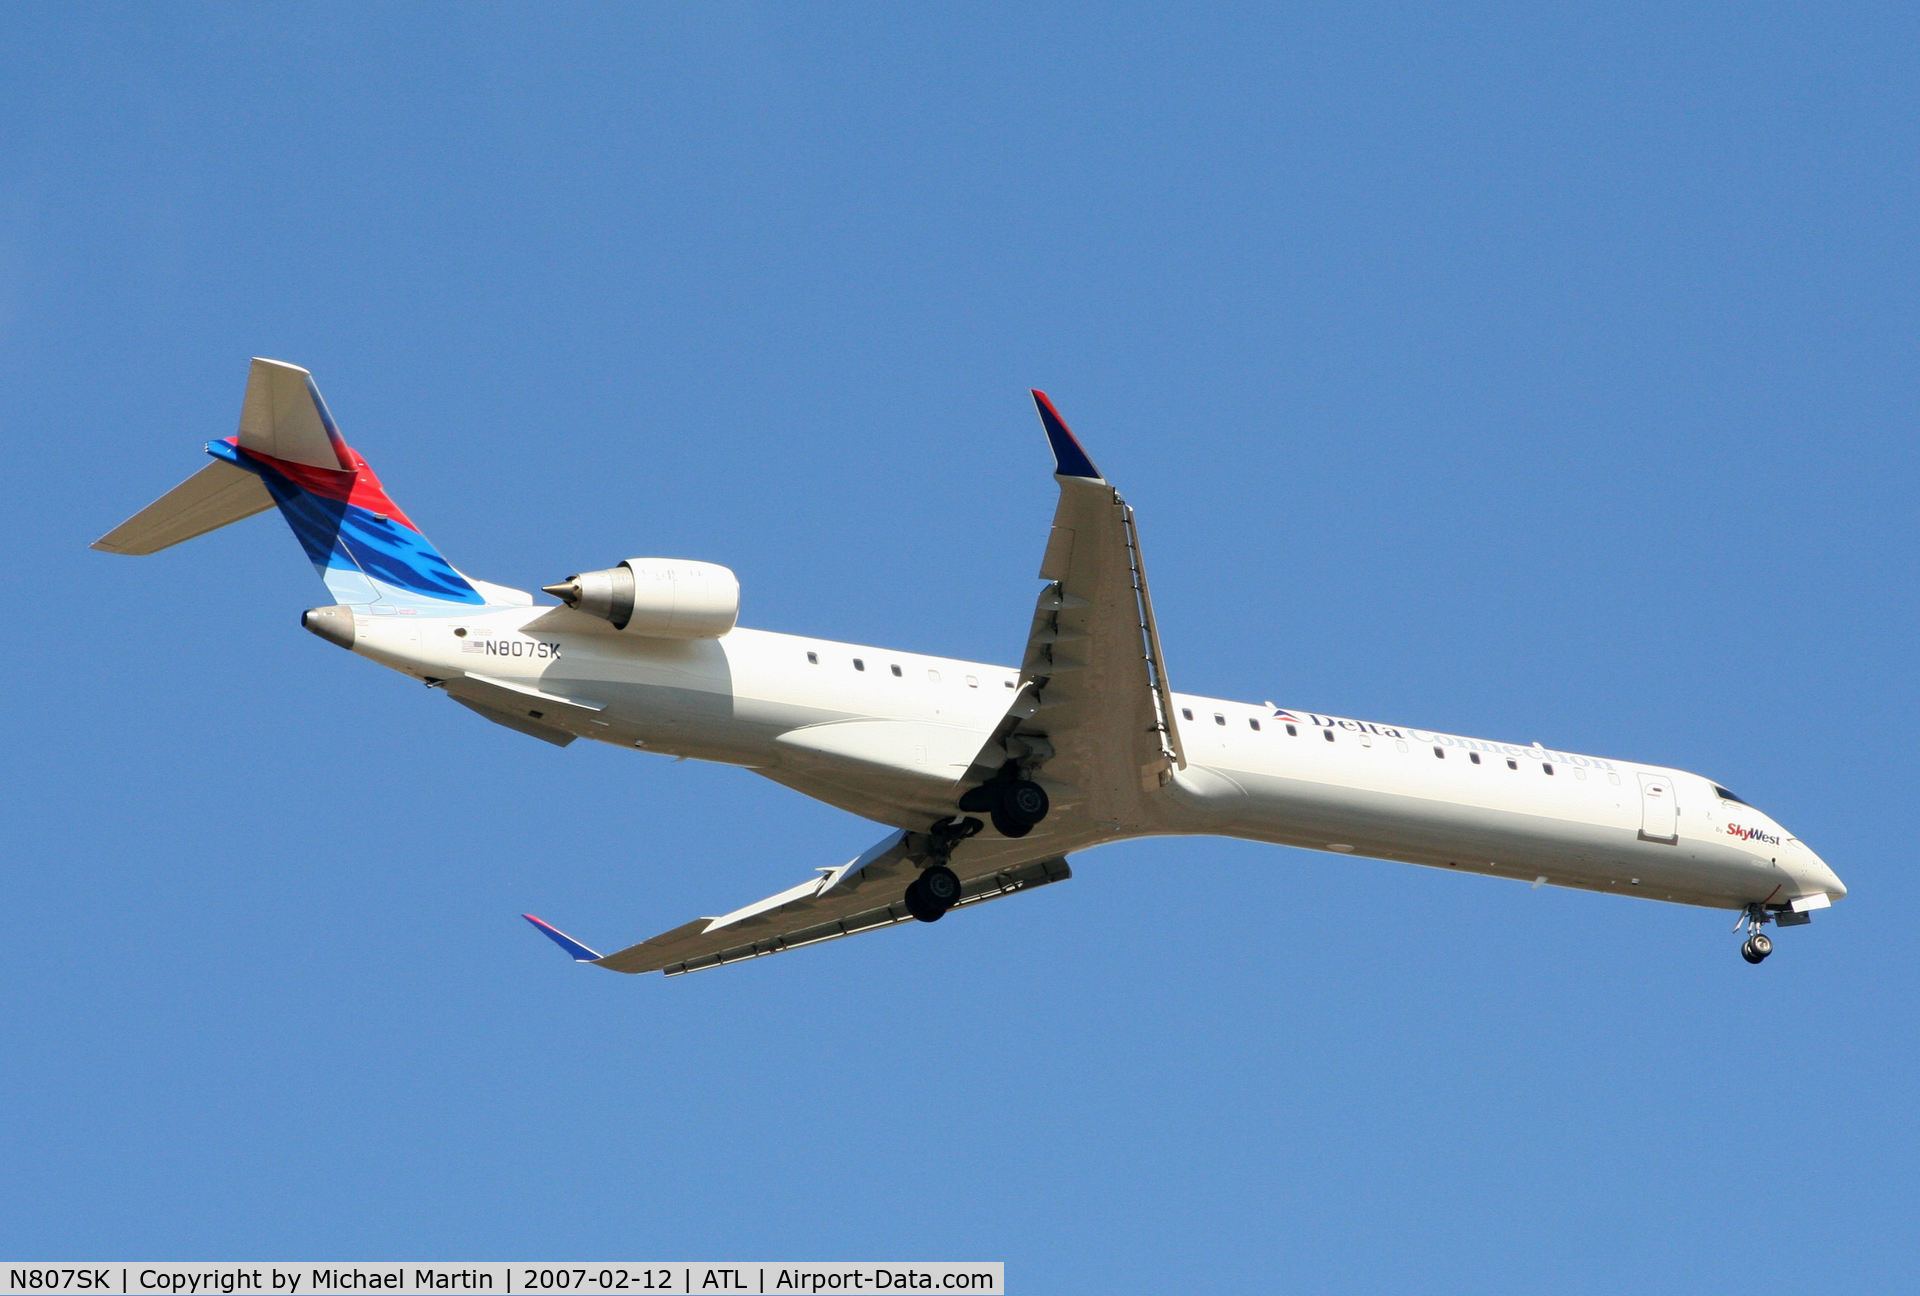 N807SK, 2006 Bombardier CRJ-900ER (CL-600-2D24) C/N 15082, Over the numbers of 9R